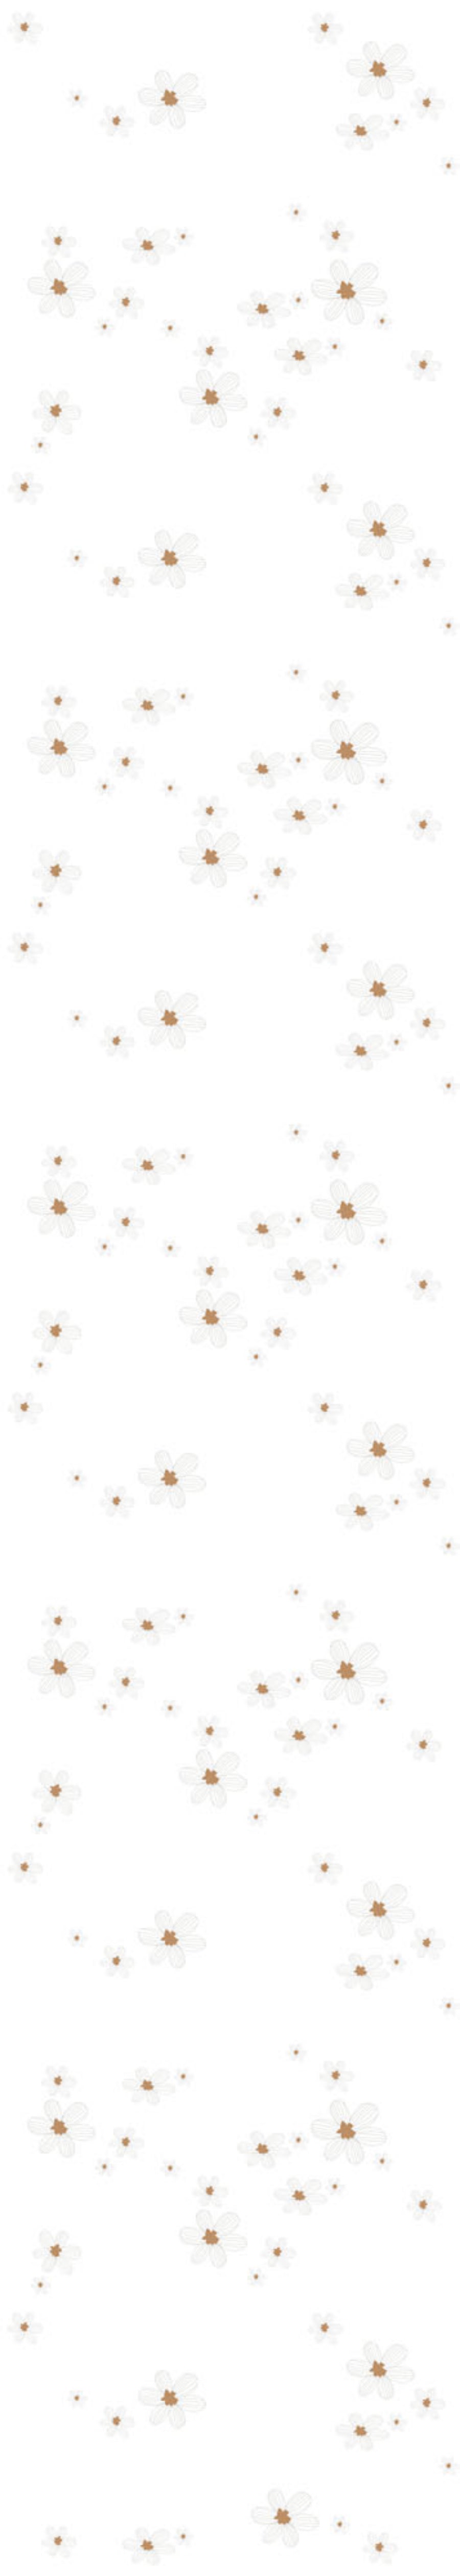 Graphic Flowers On White Background Wallpaper 50x280CM